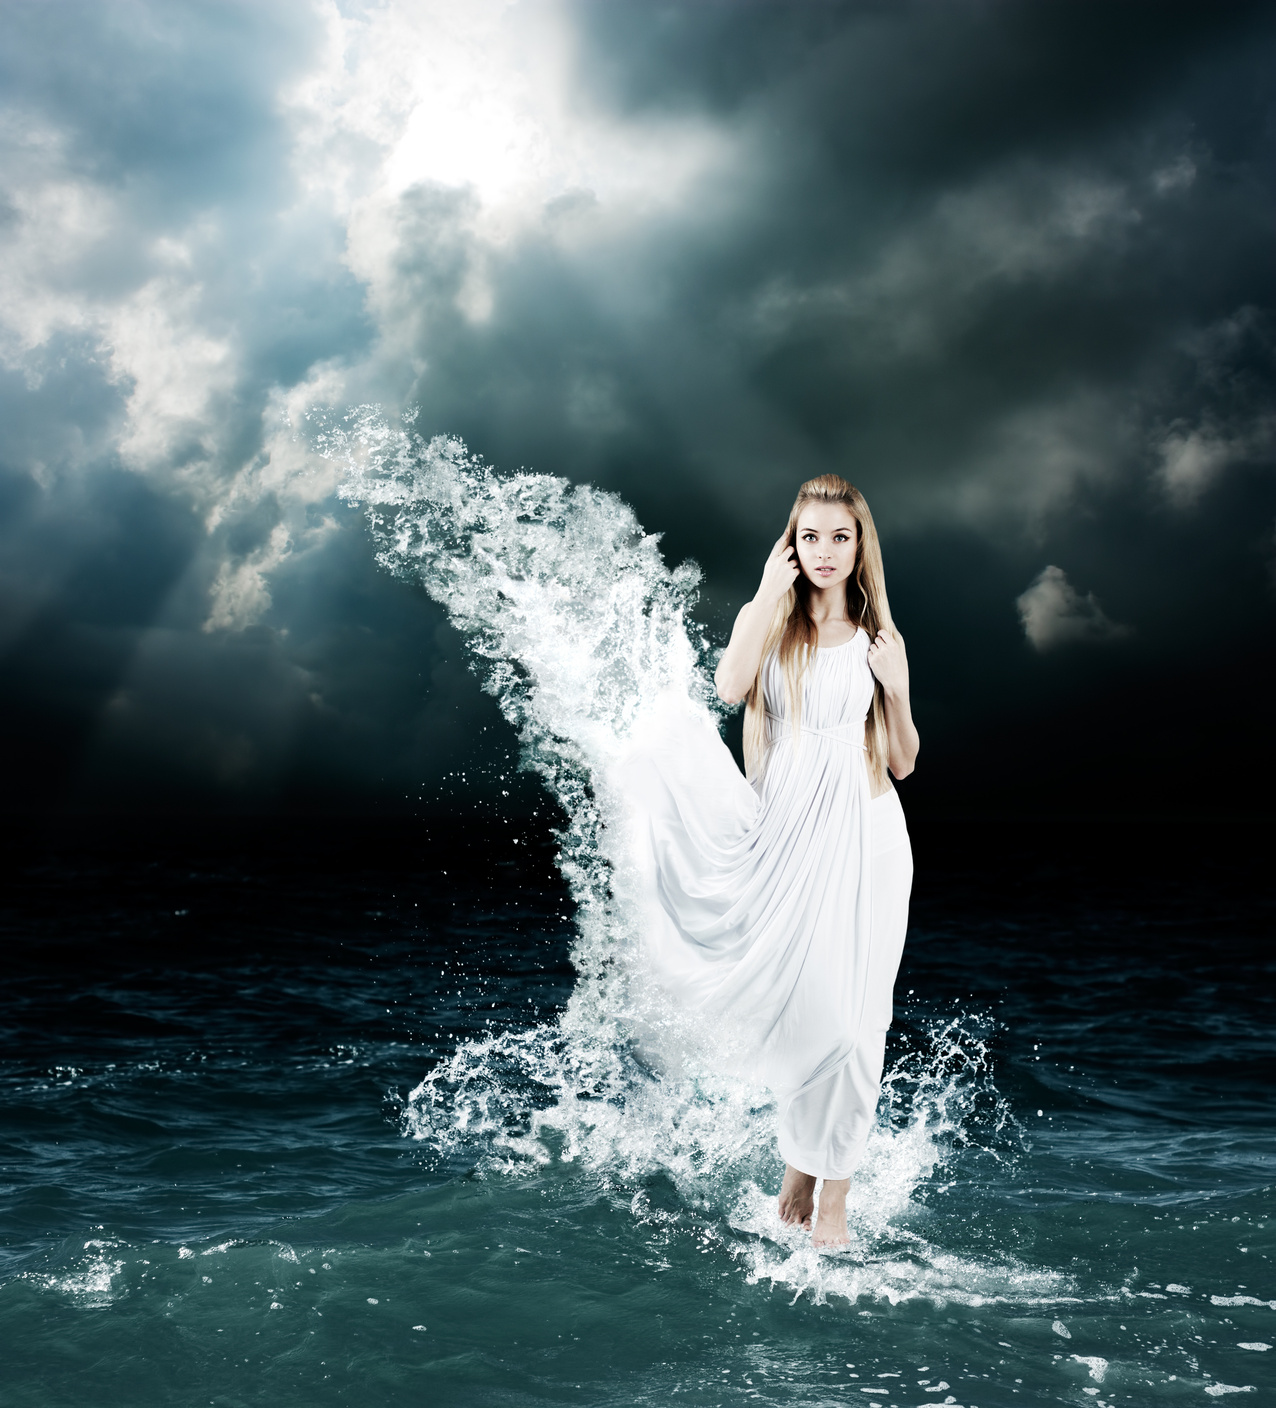 A mystic goddess appearing out of a stormy sea